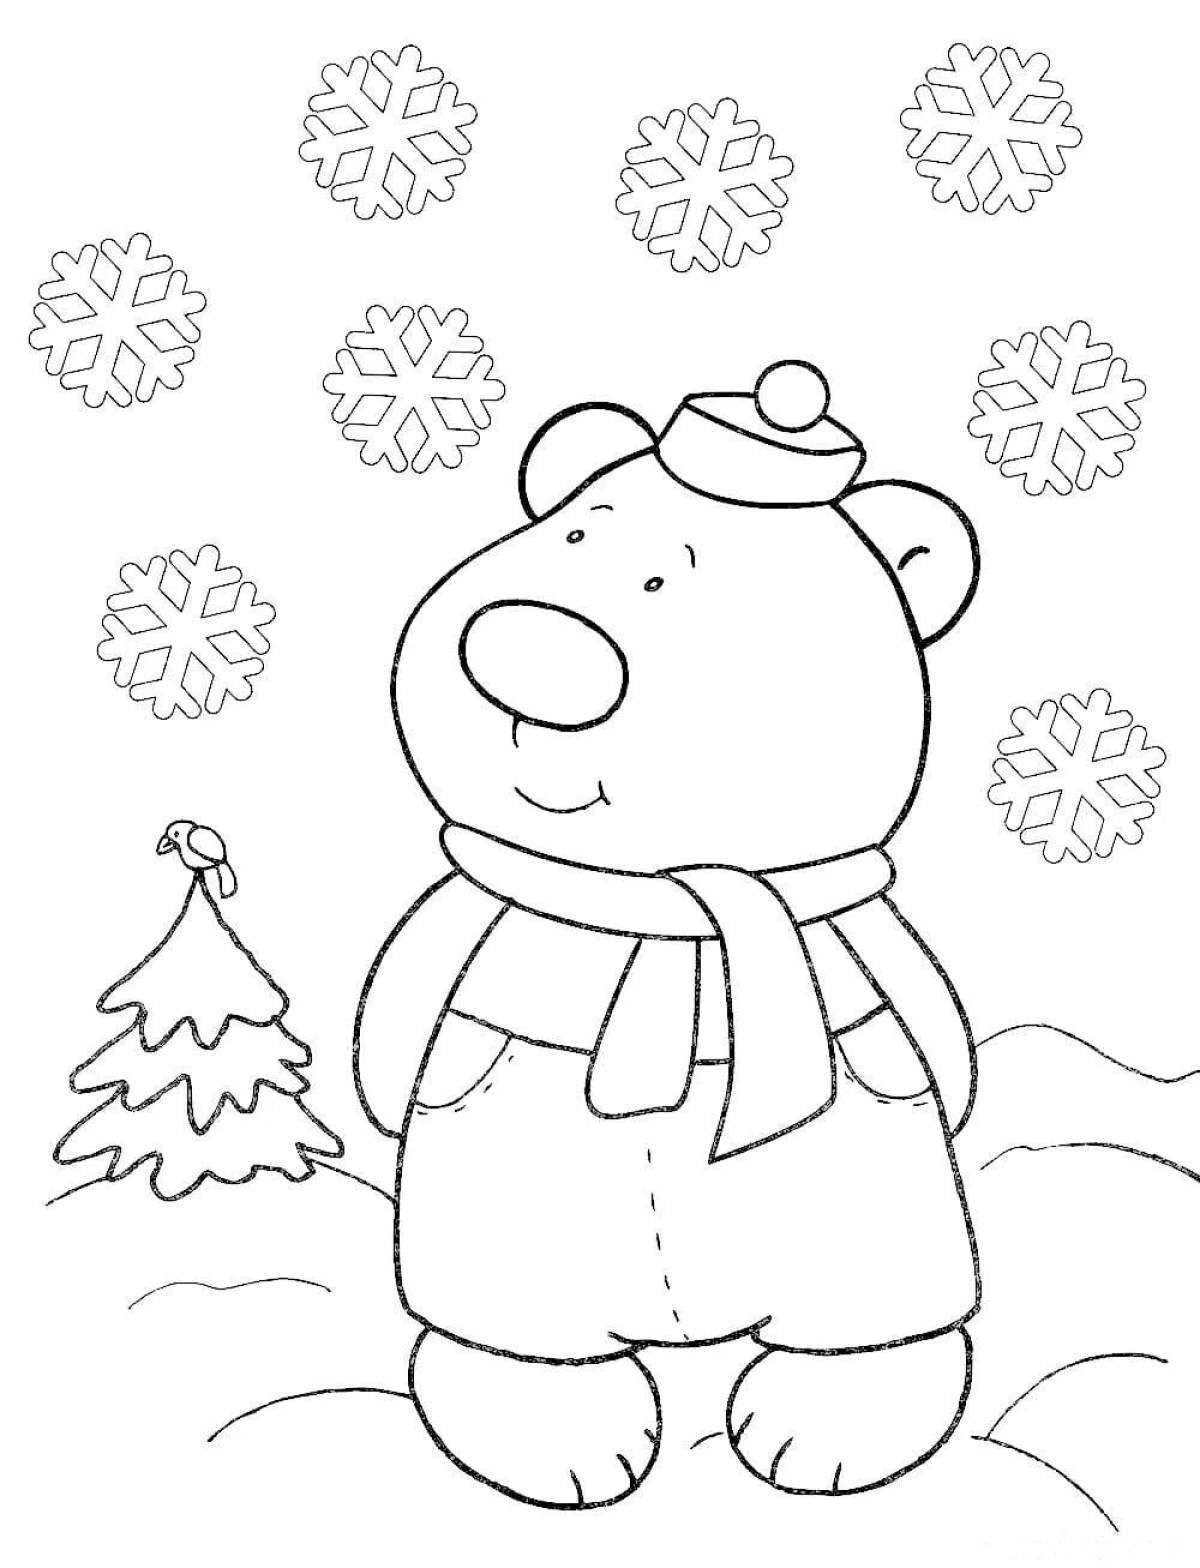 Coloring book snowball bear in winter